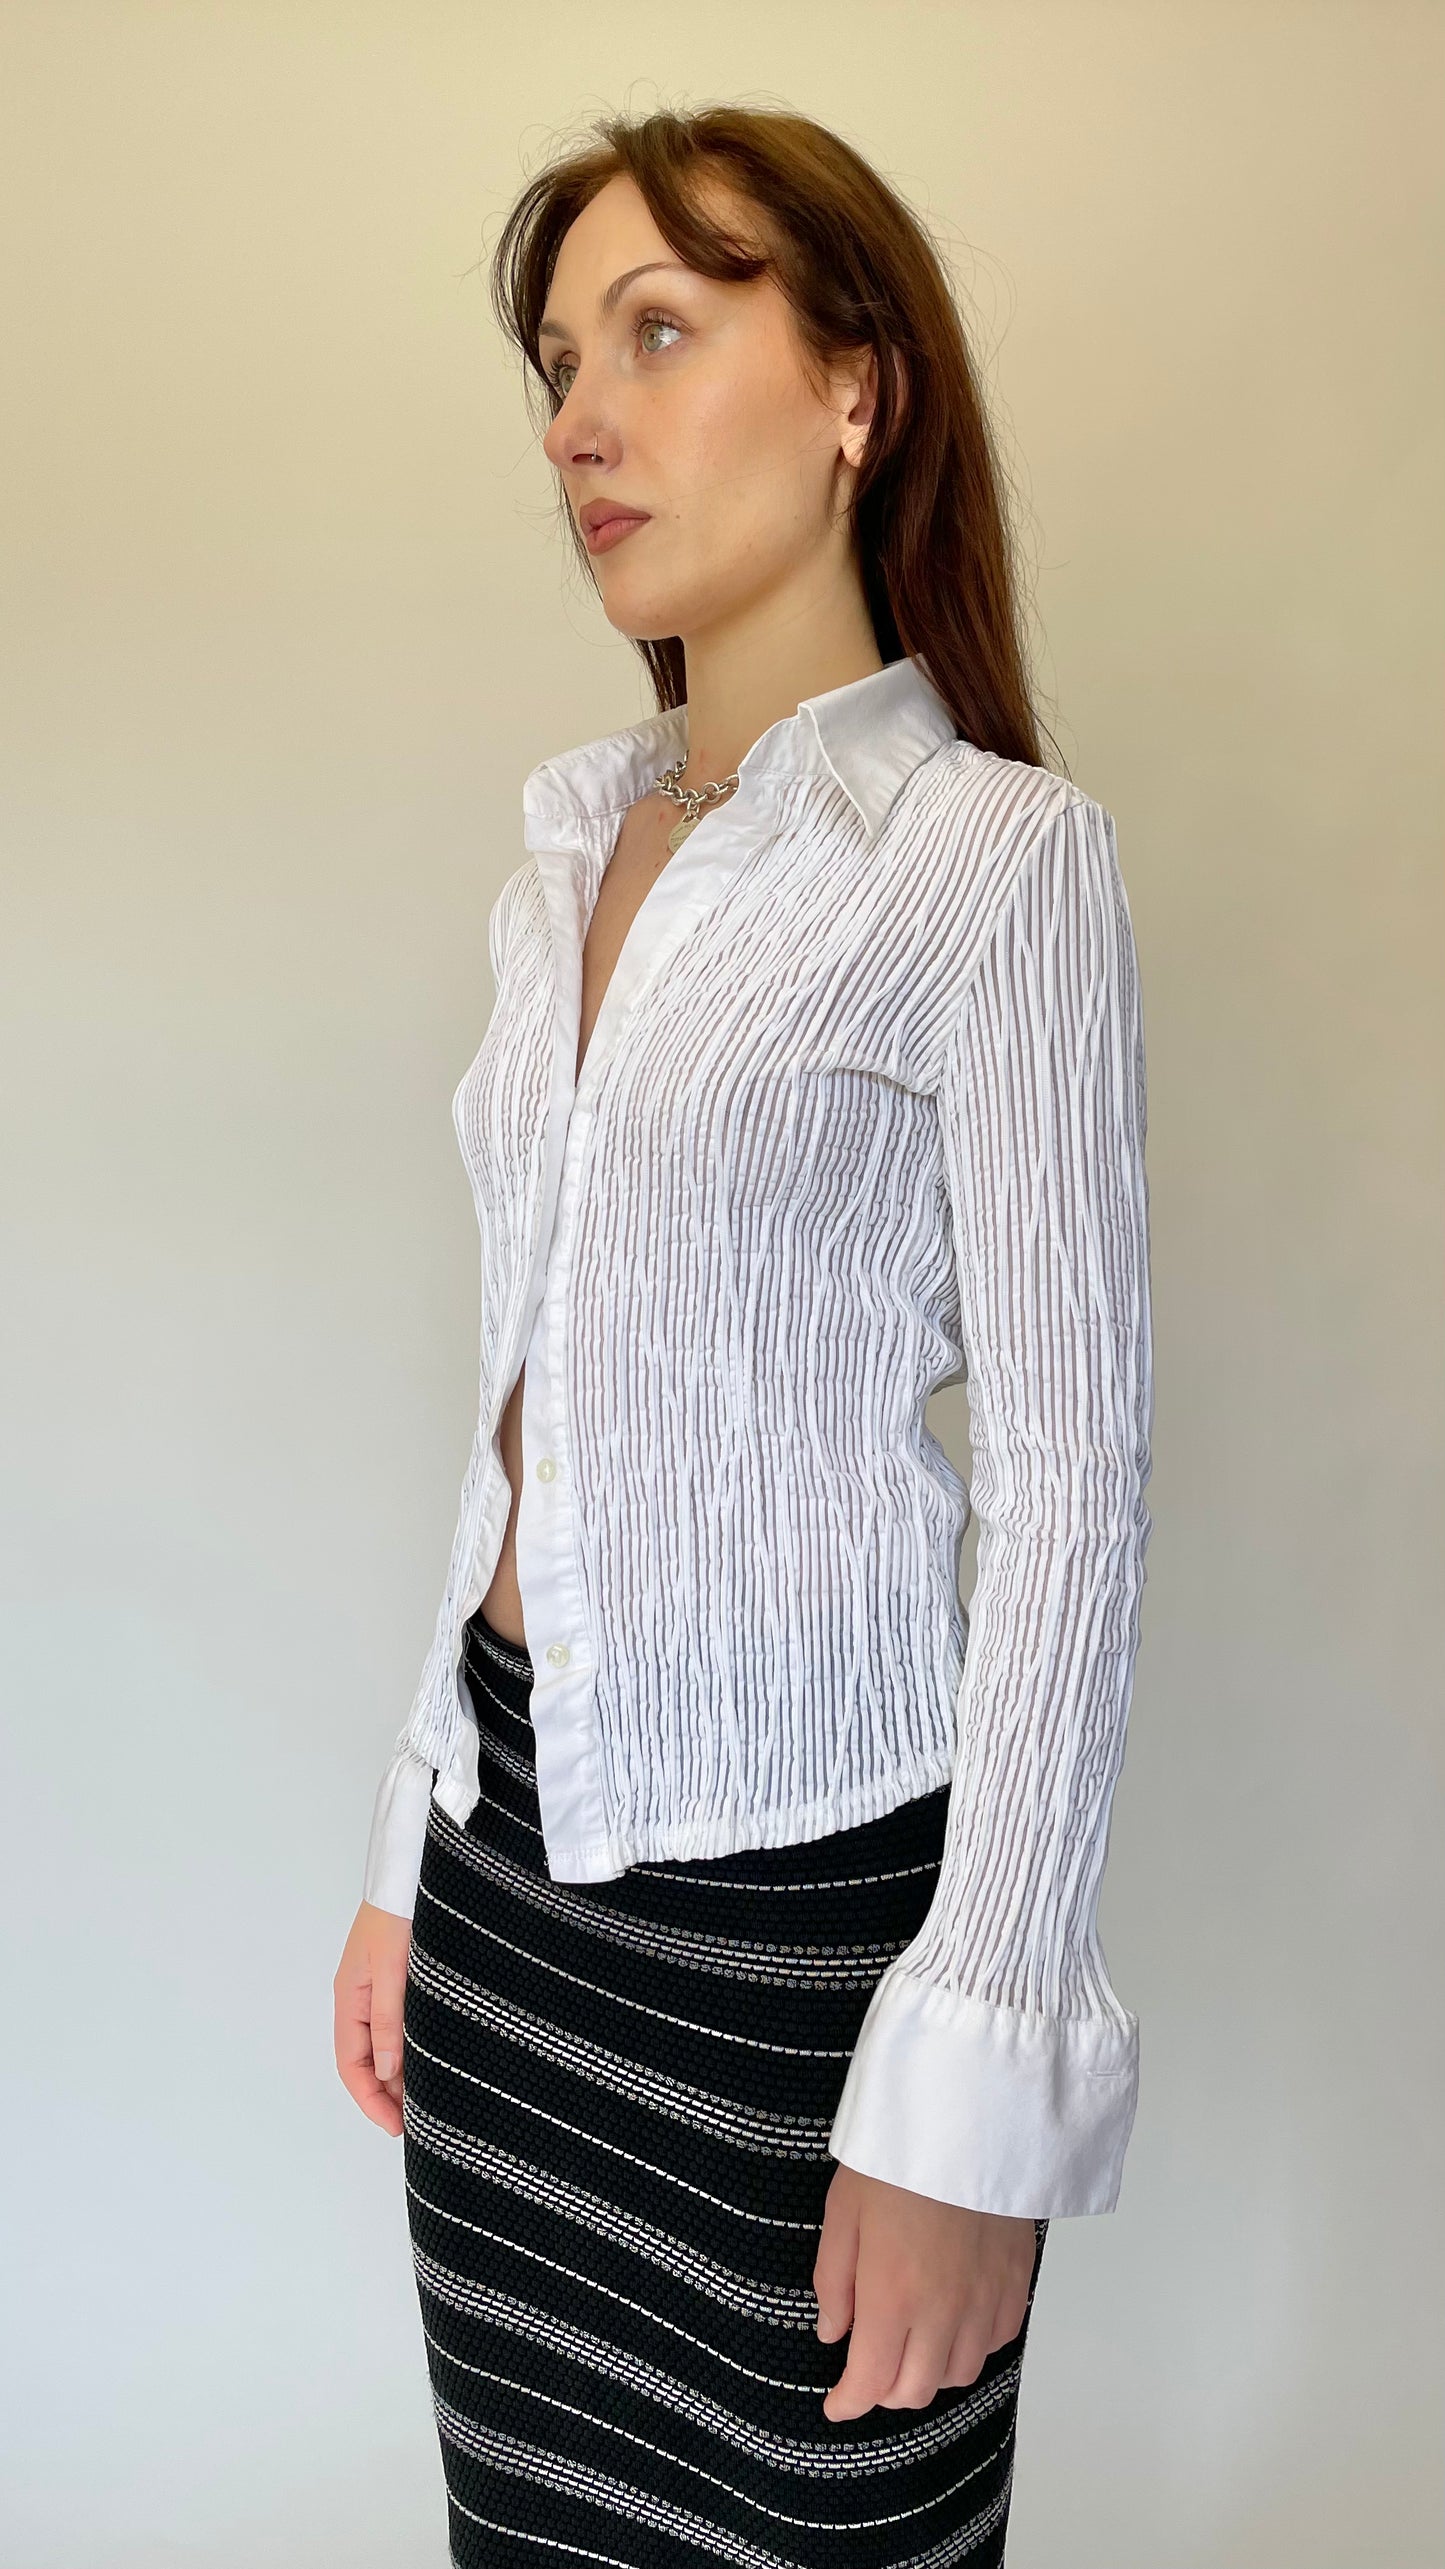 Textured sheer white button up (size M/L)